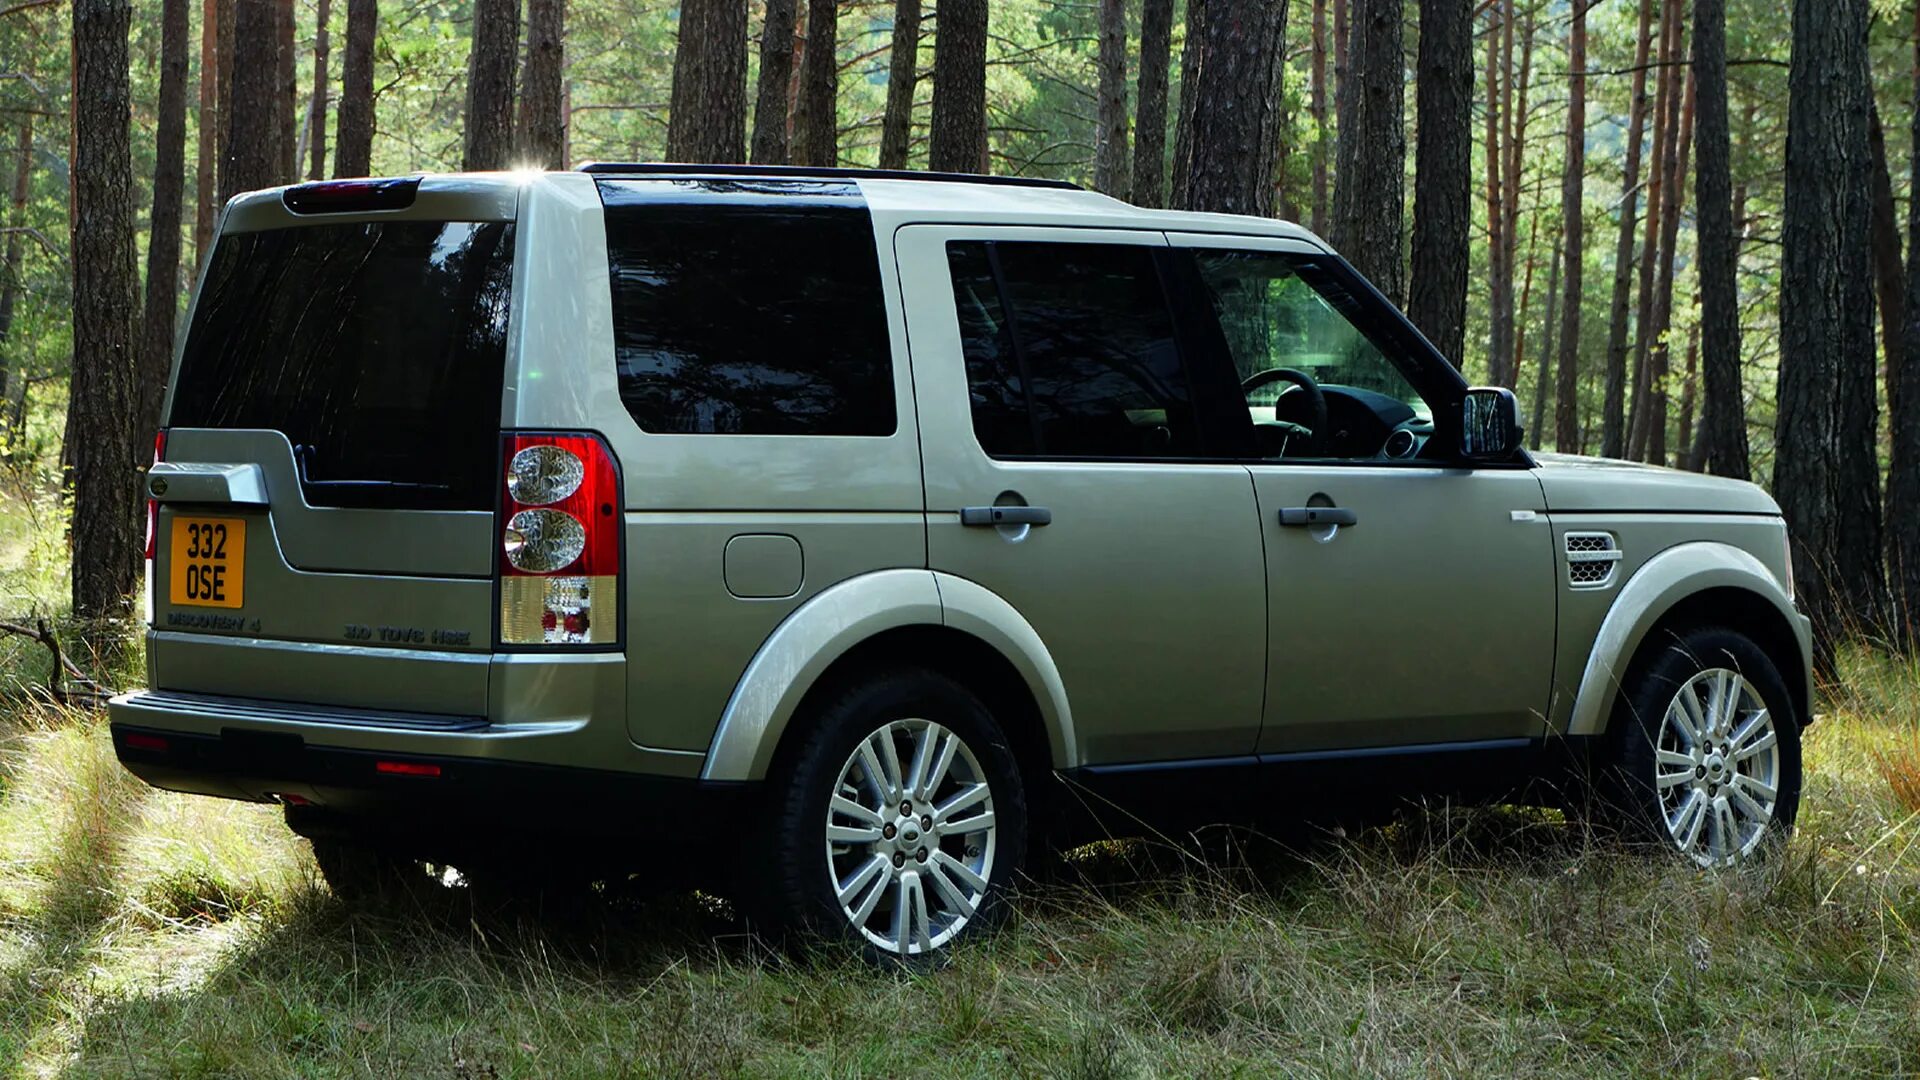 Дискавери 2014. Land Rover Discovery 4. Ленд Ровер Дискавери 4 2009. Лэнд ровыер Дискавери 4. Ленд Ровер Дискавери 4 2014.